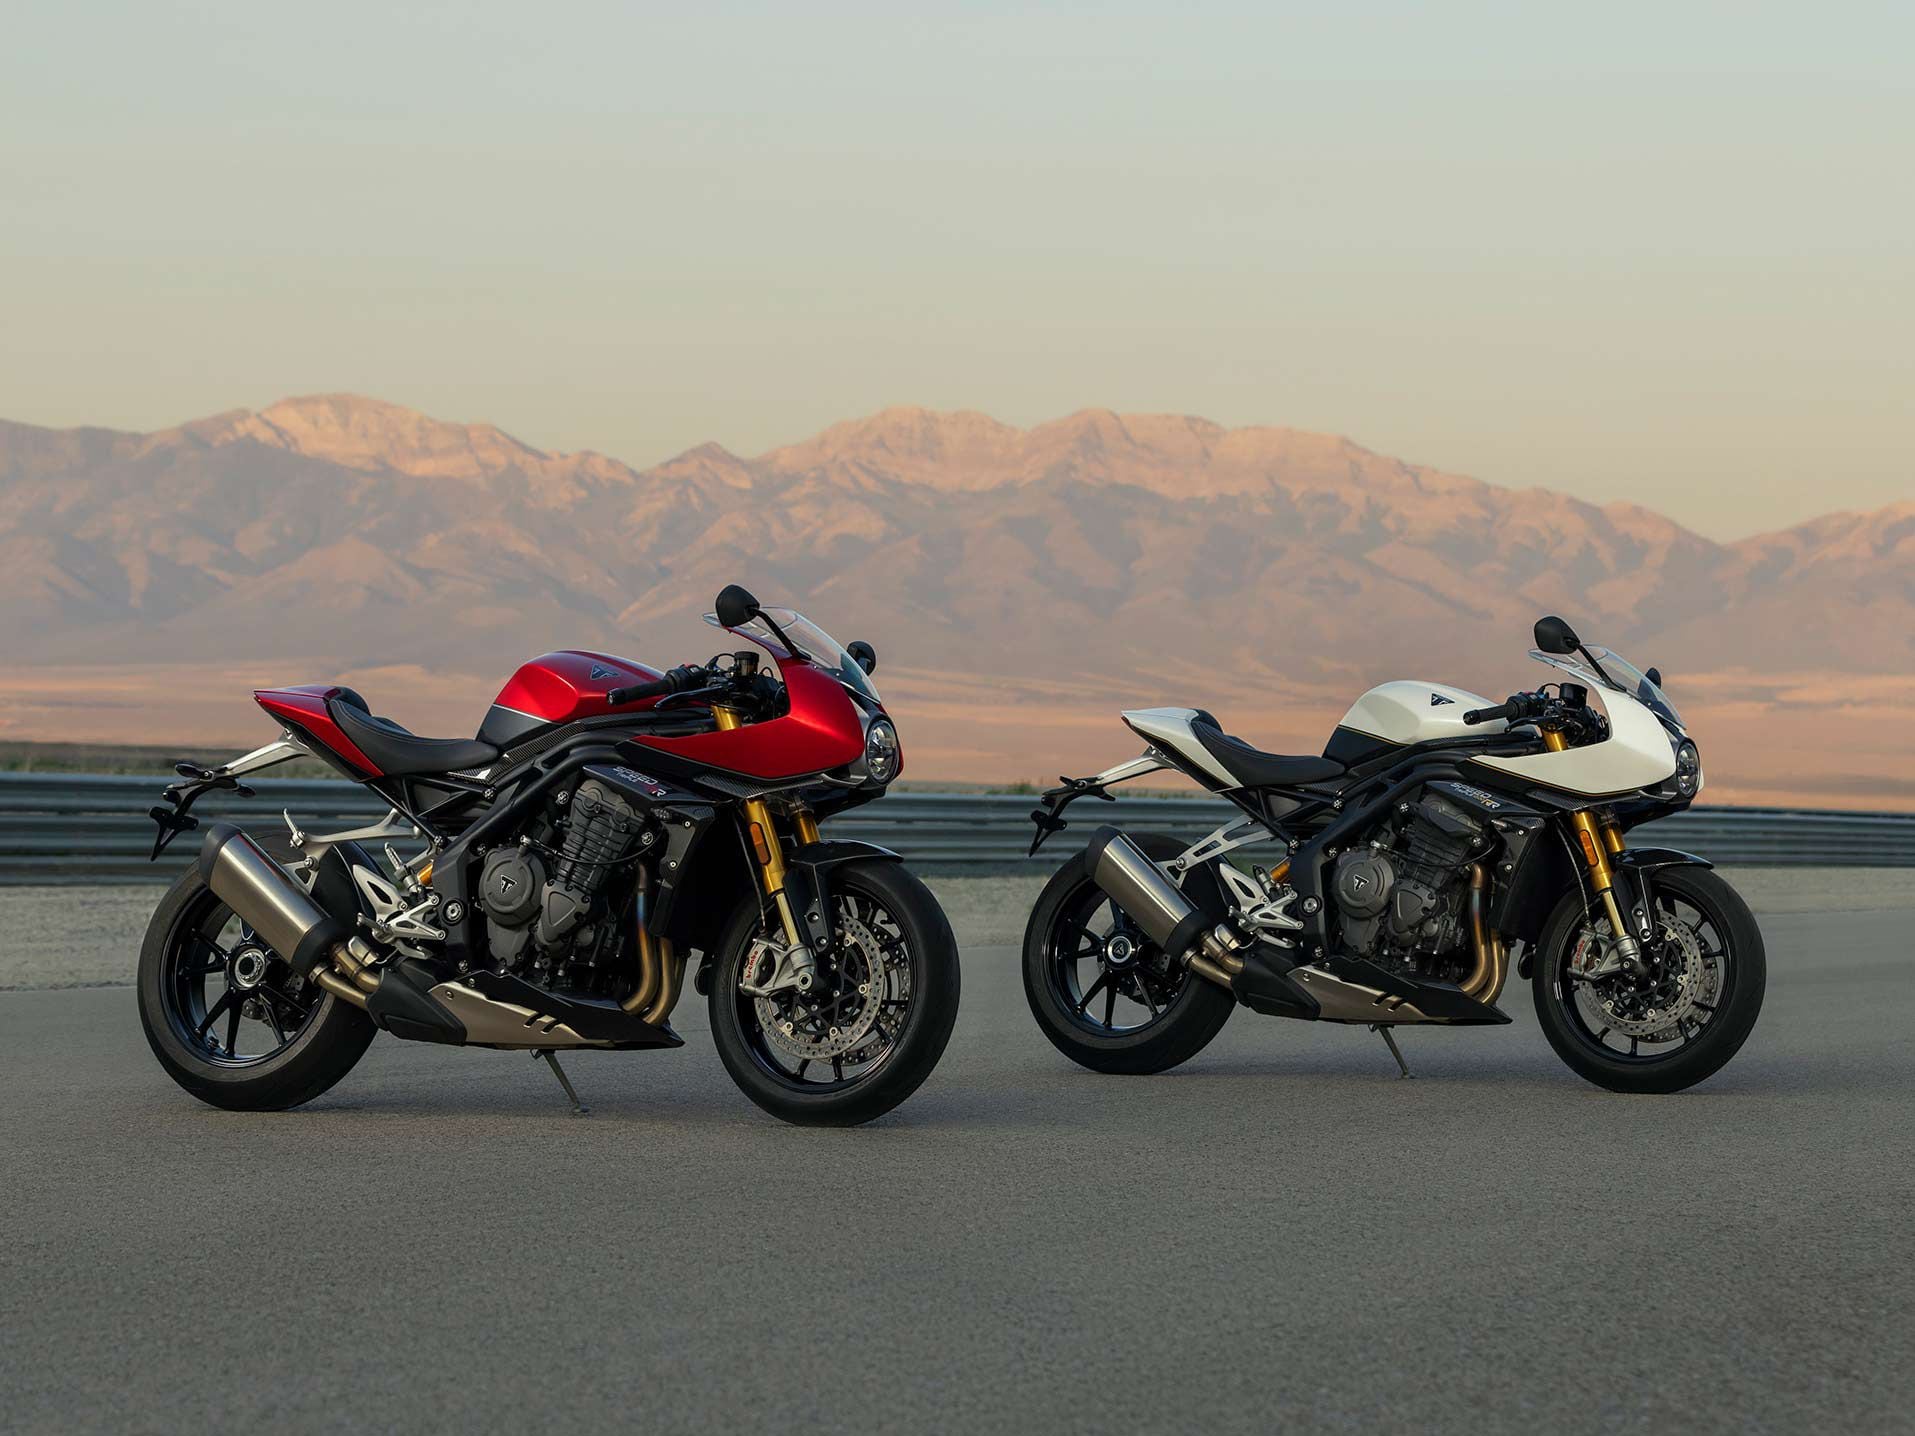 The Speed Triple 1200 RR is available in Crystal White Storm Grey for $20,950 and Red Hopper Storm Grey, which costs an additional $325.